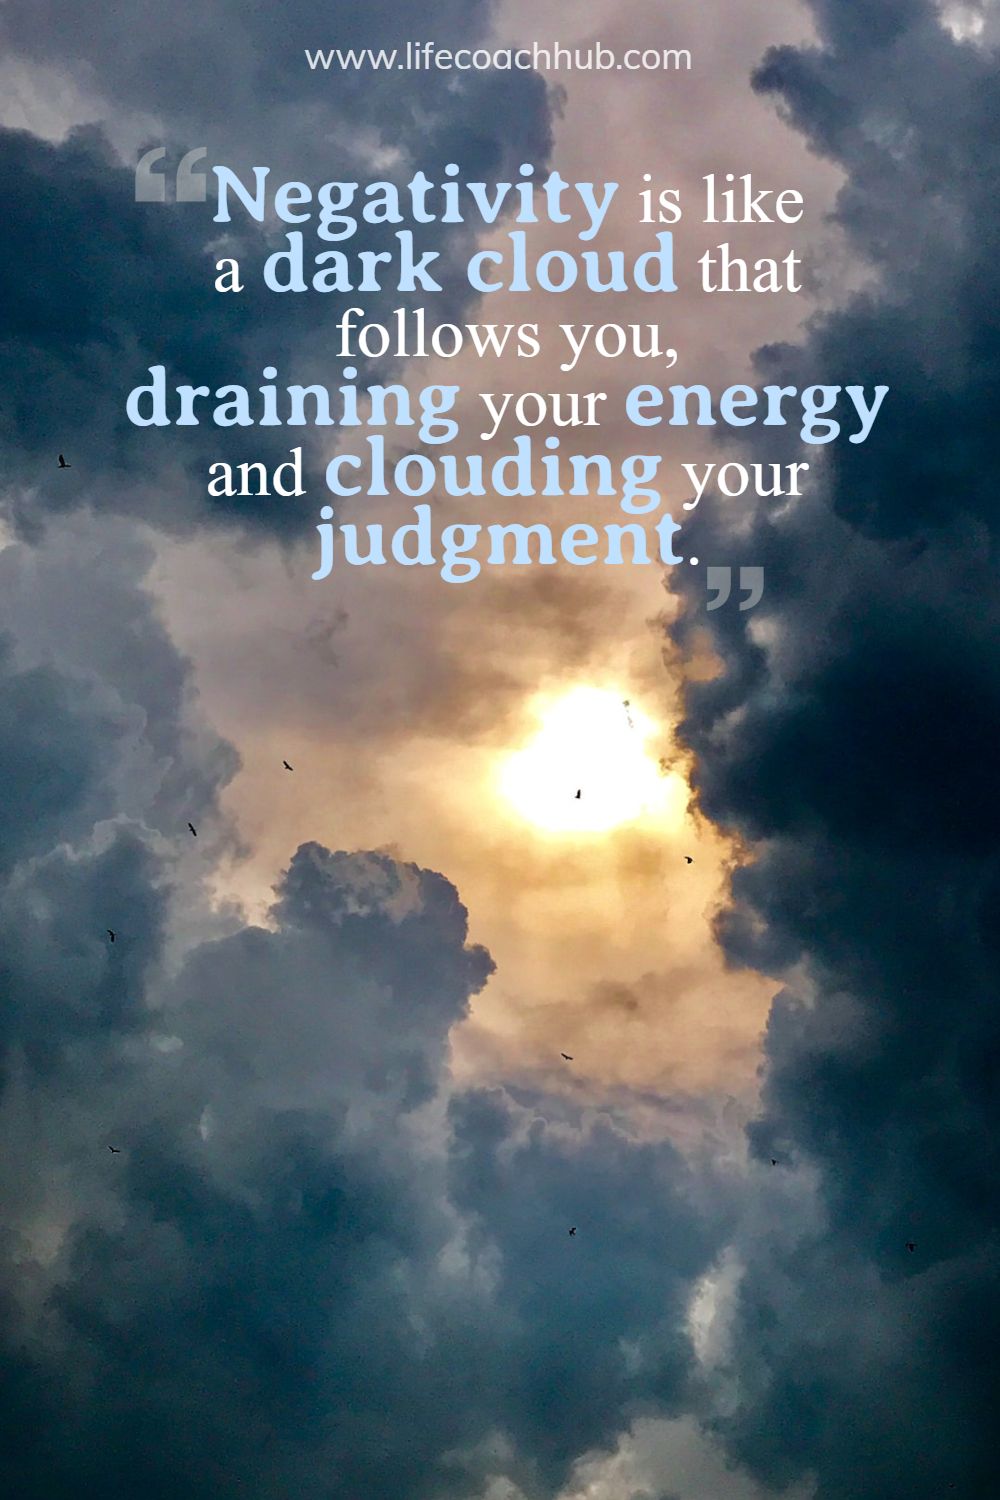 Negativity is like a dark cloud that follows you, draining your energy and clouding your judgment. Unknown Coaching Quote